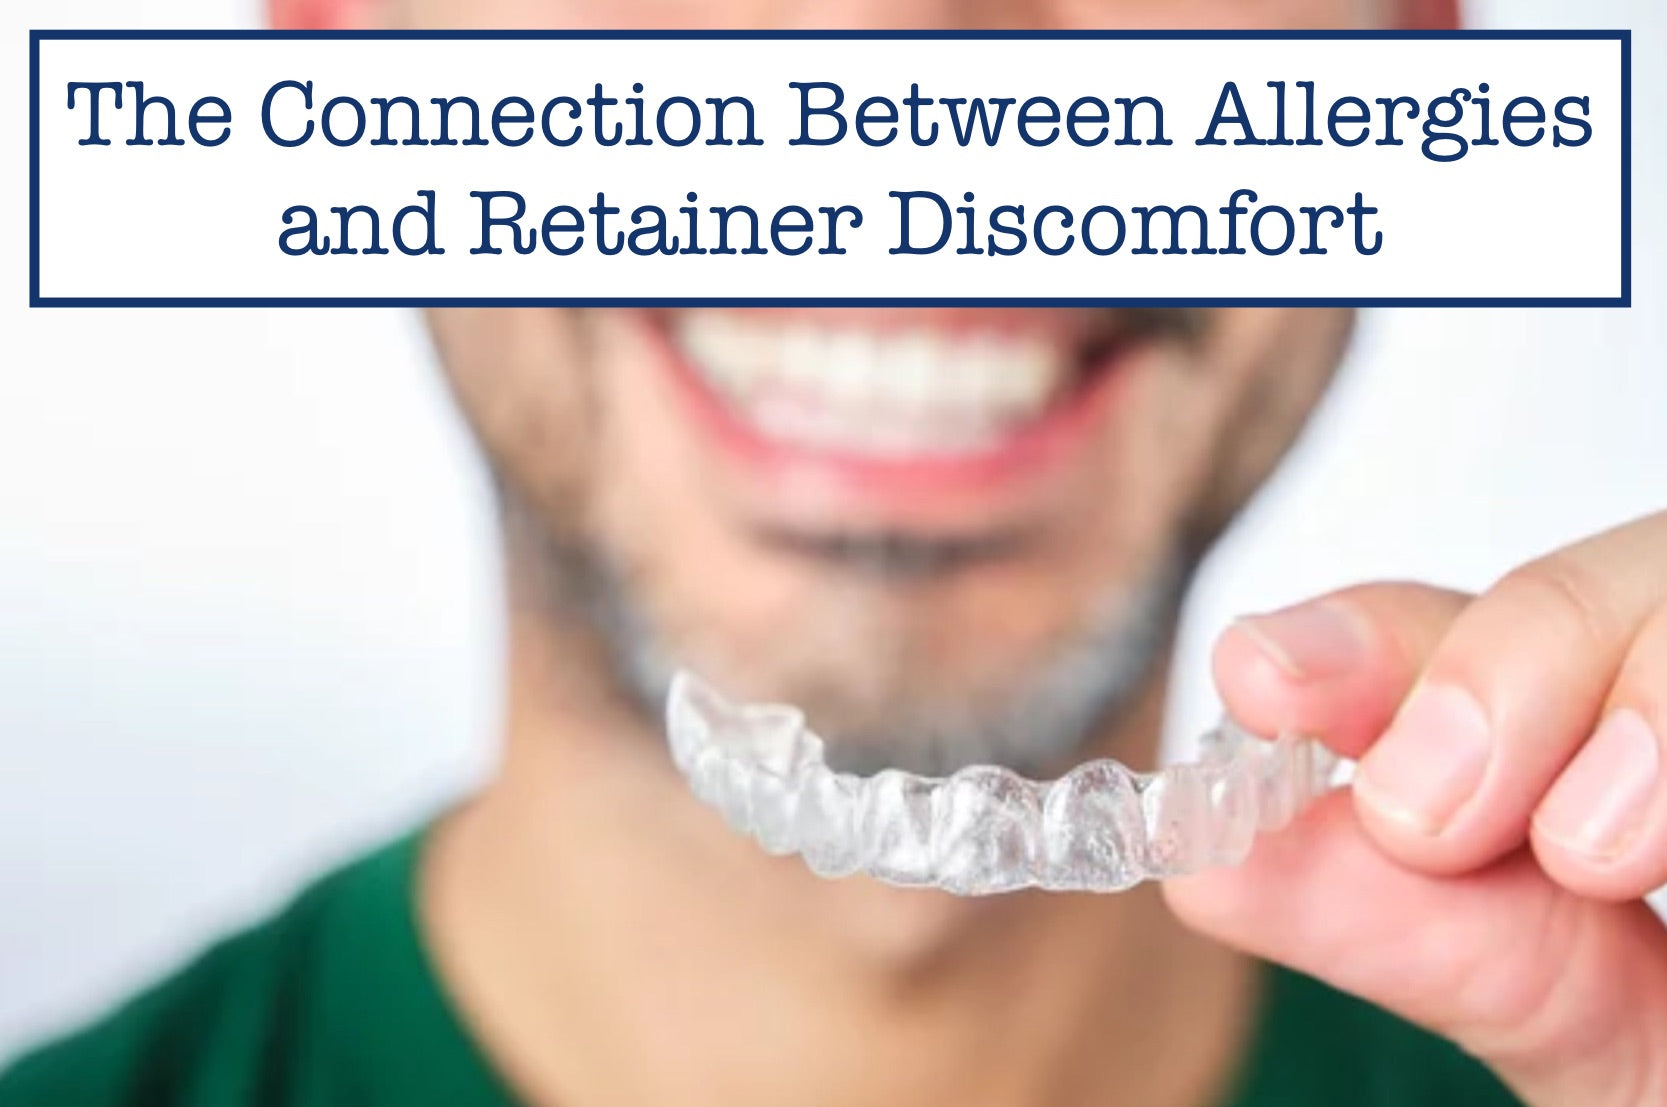 The Connection Between Allergies and Retainer Discomfort